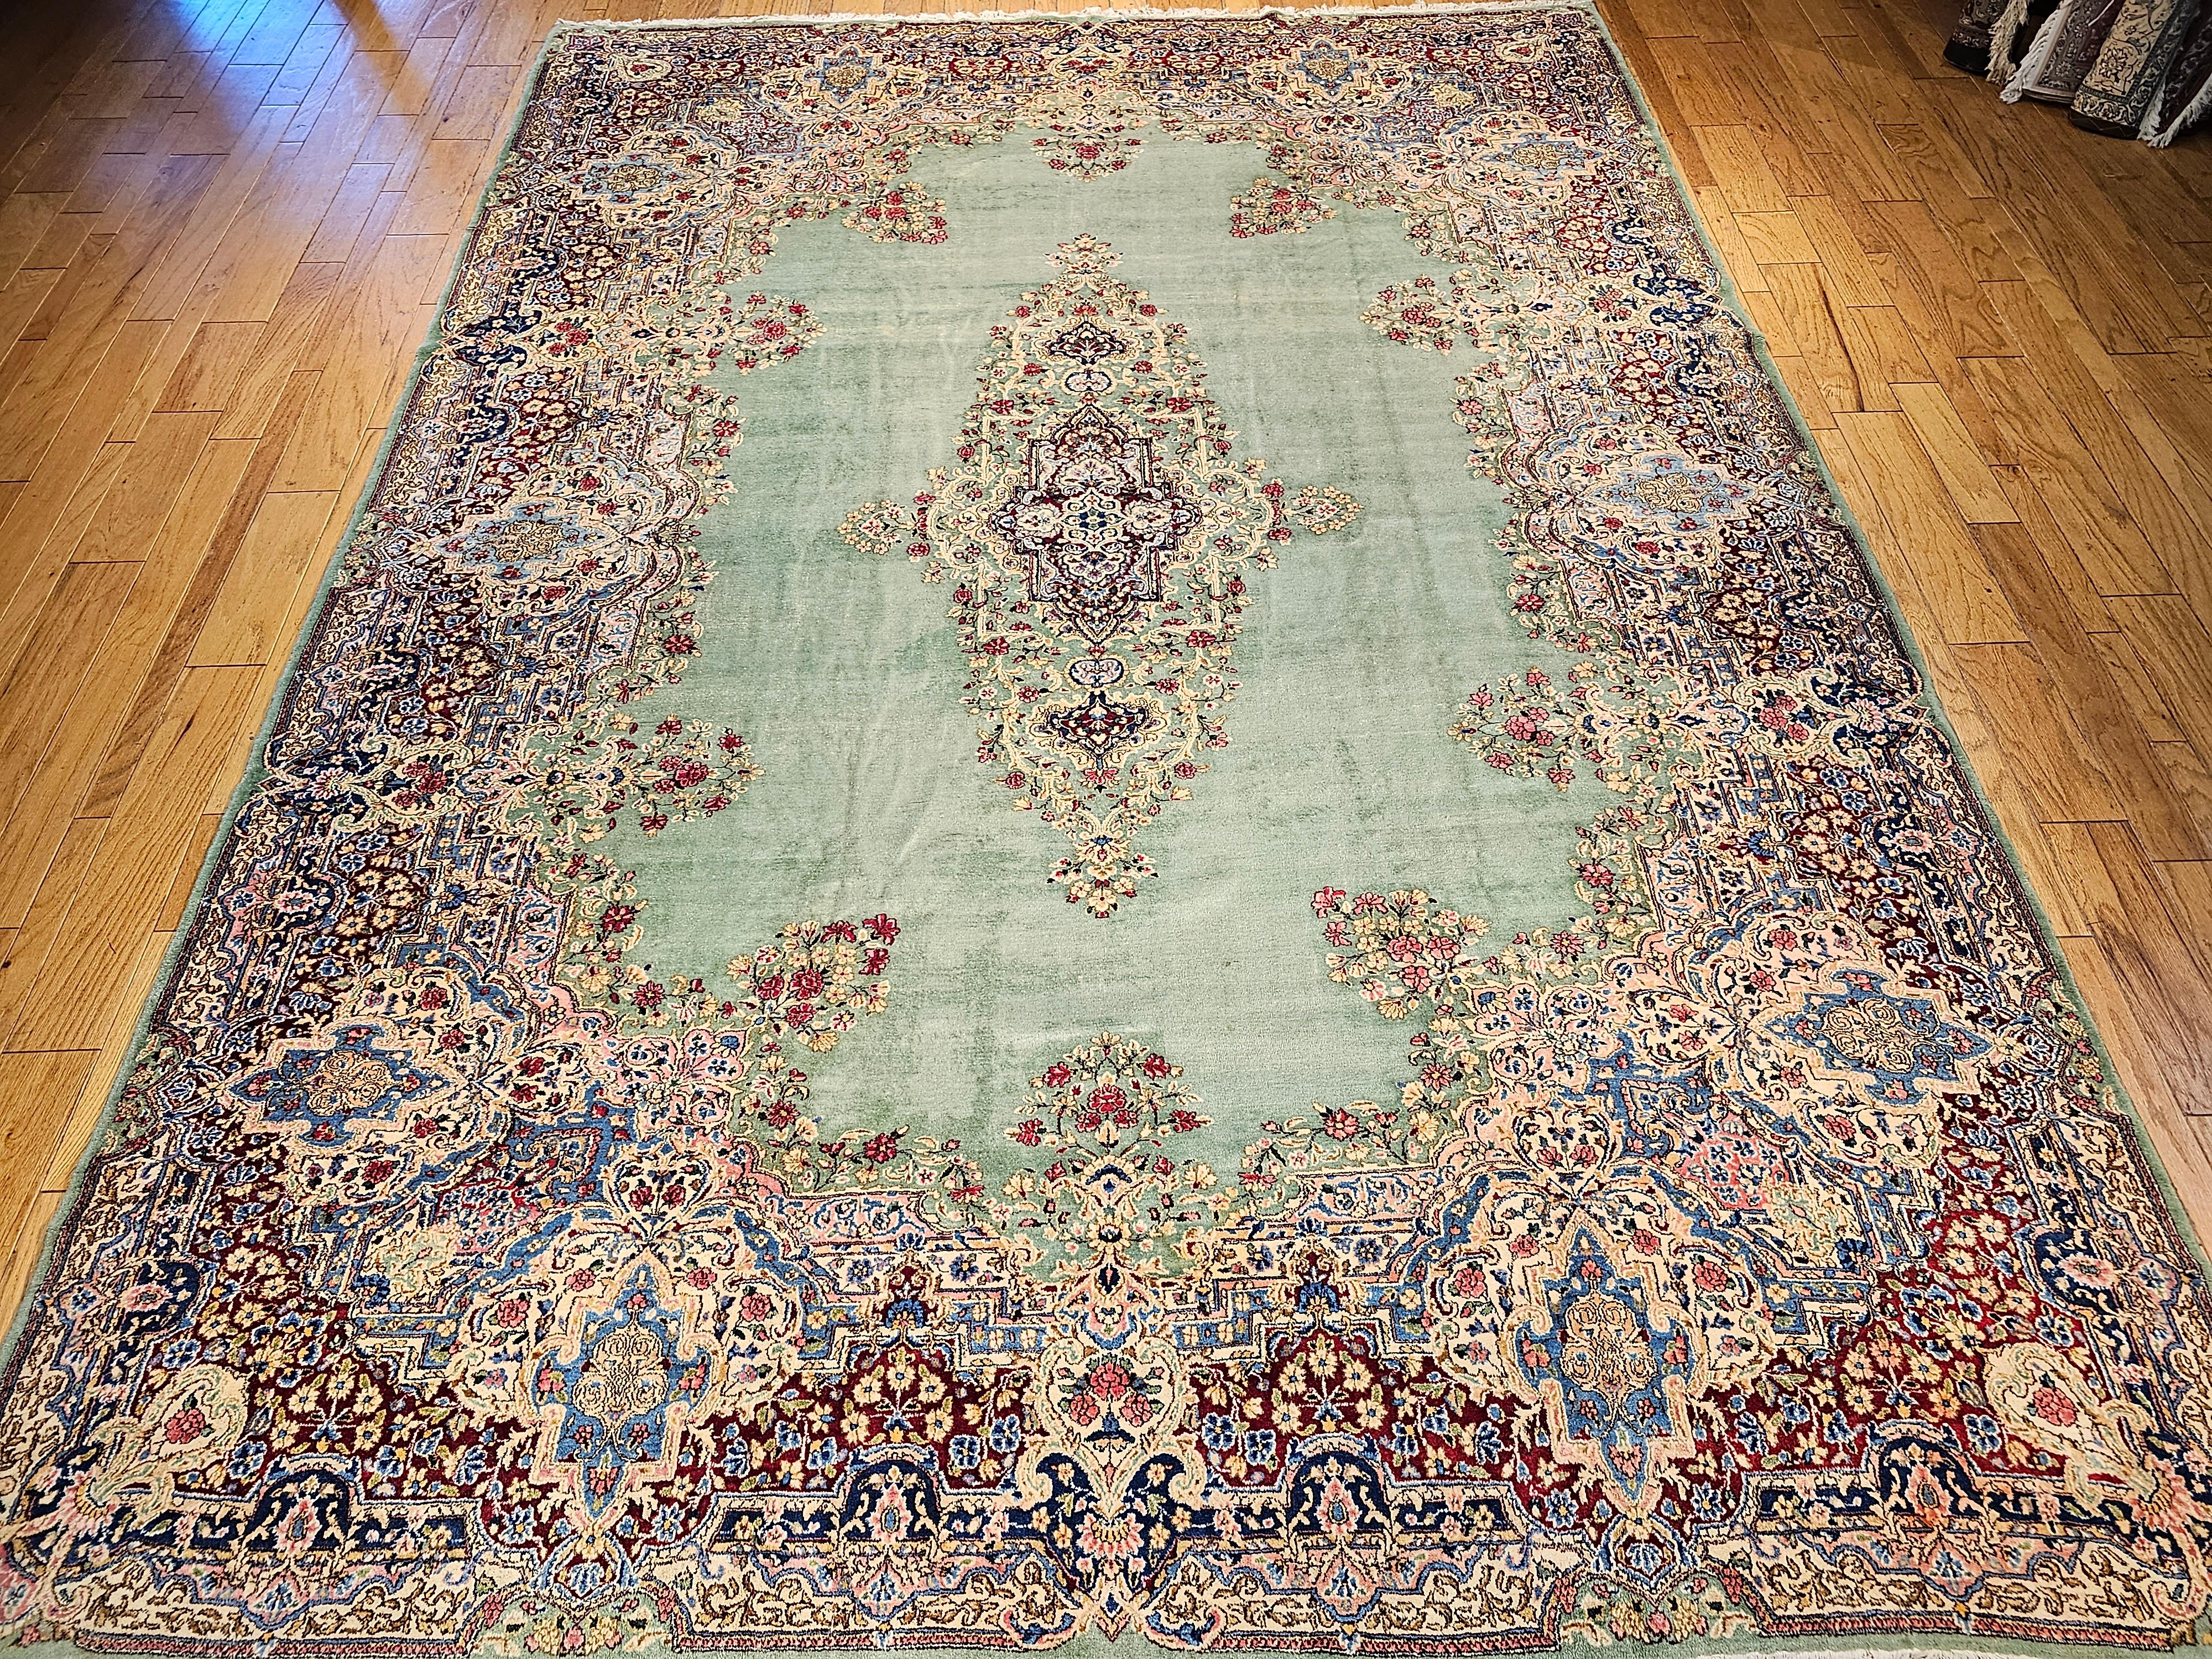 The oversized vintage Persian Kerman carpet has a very soft and unique and highly desirable pale green background color circa the 1940s. The Kerman rug has a wide border with a floral design and bouquets in brilliant colors of red, green, pink, and